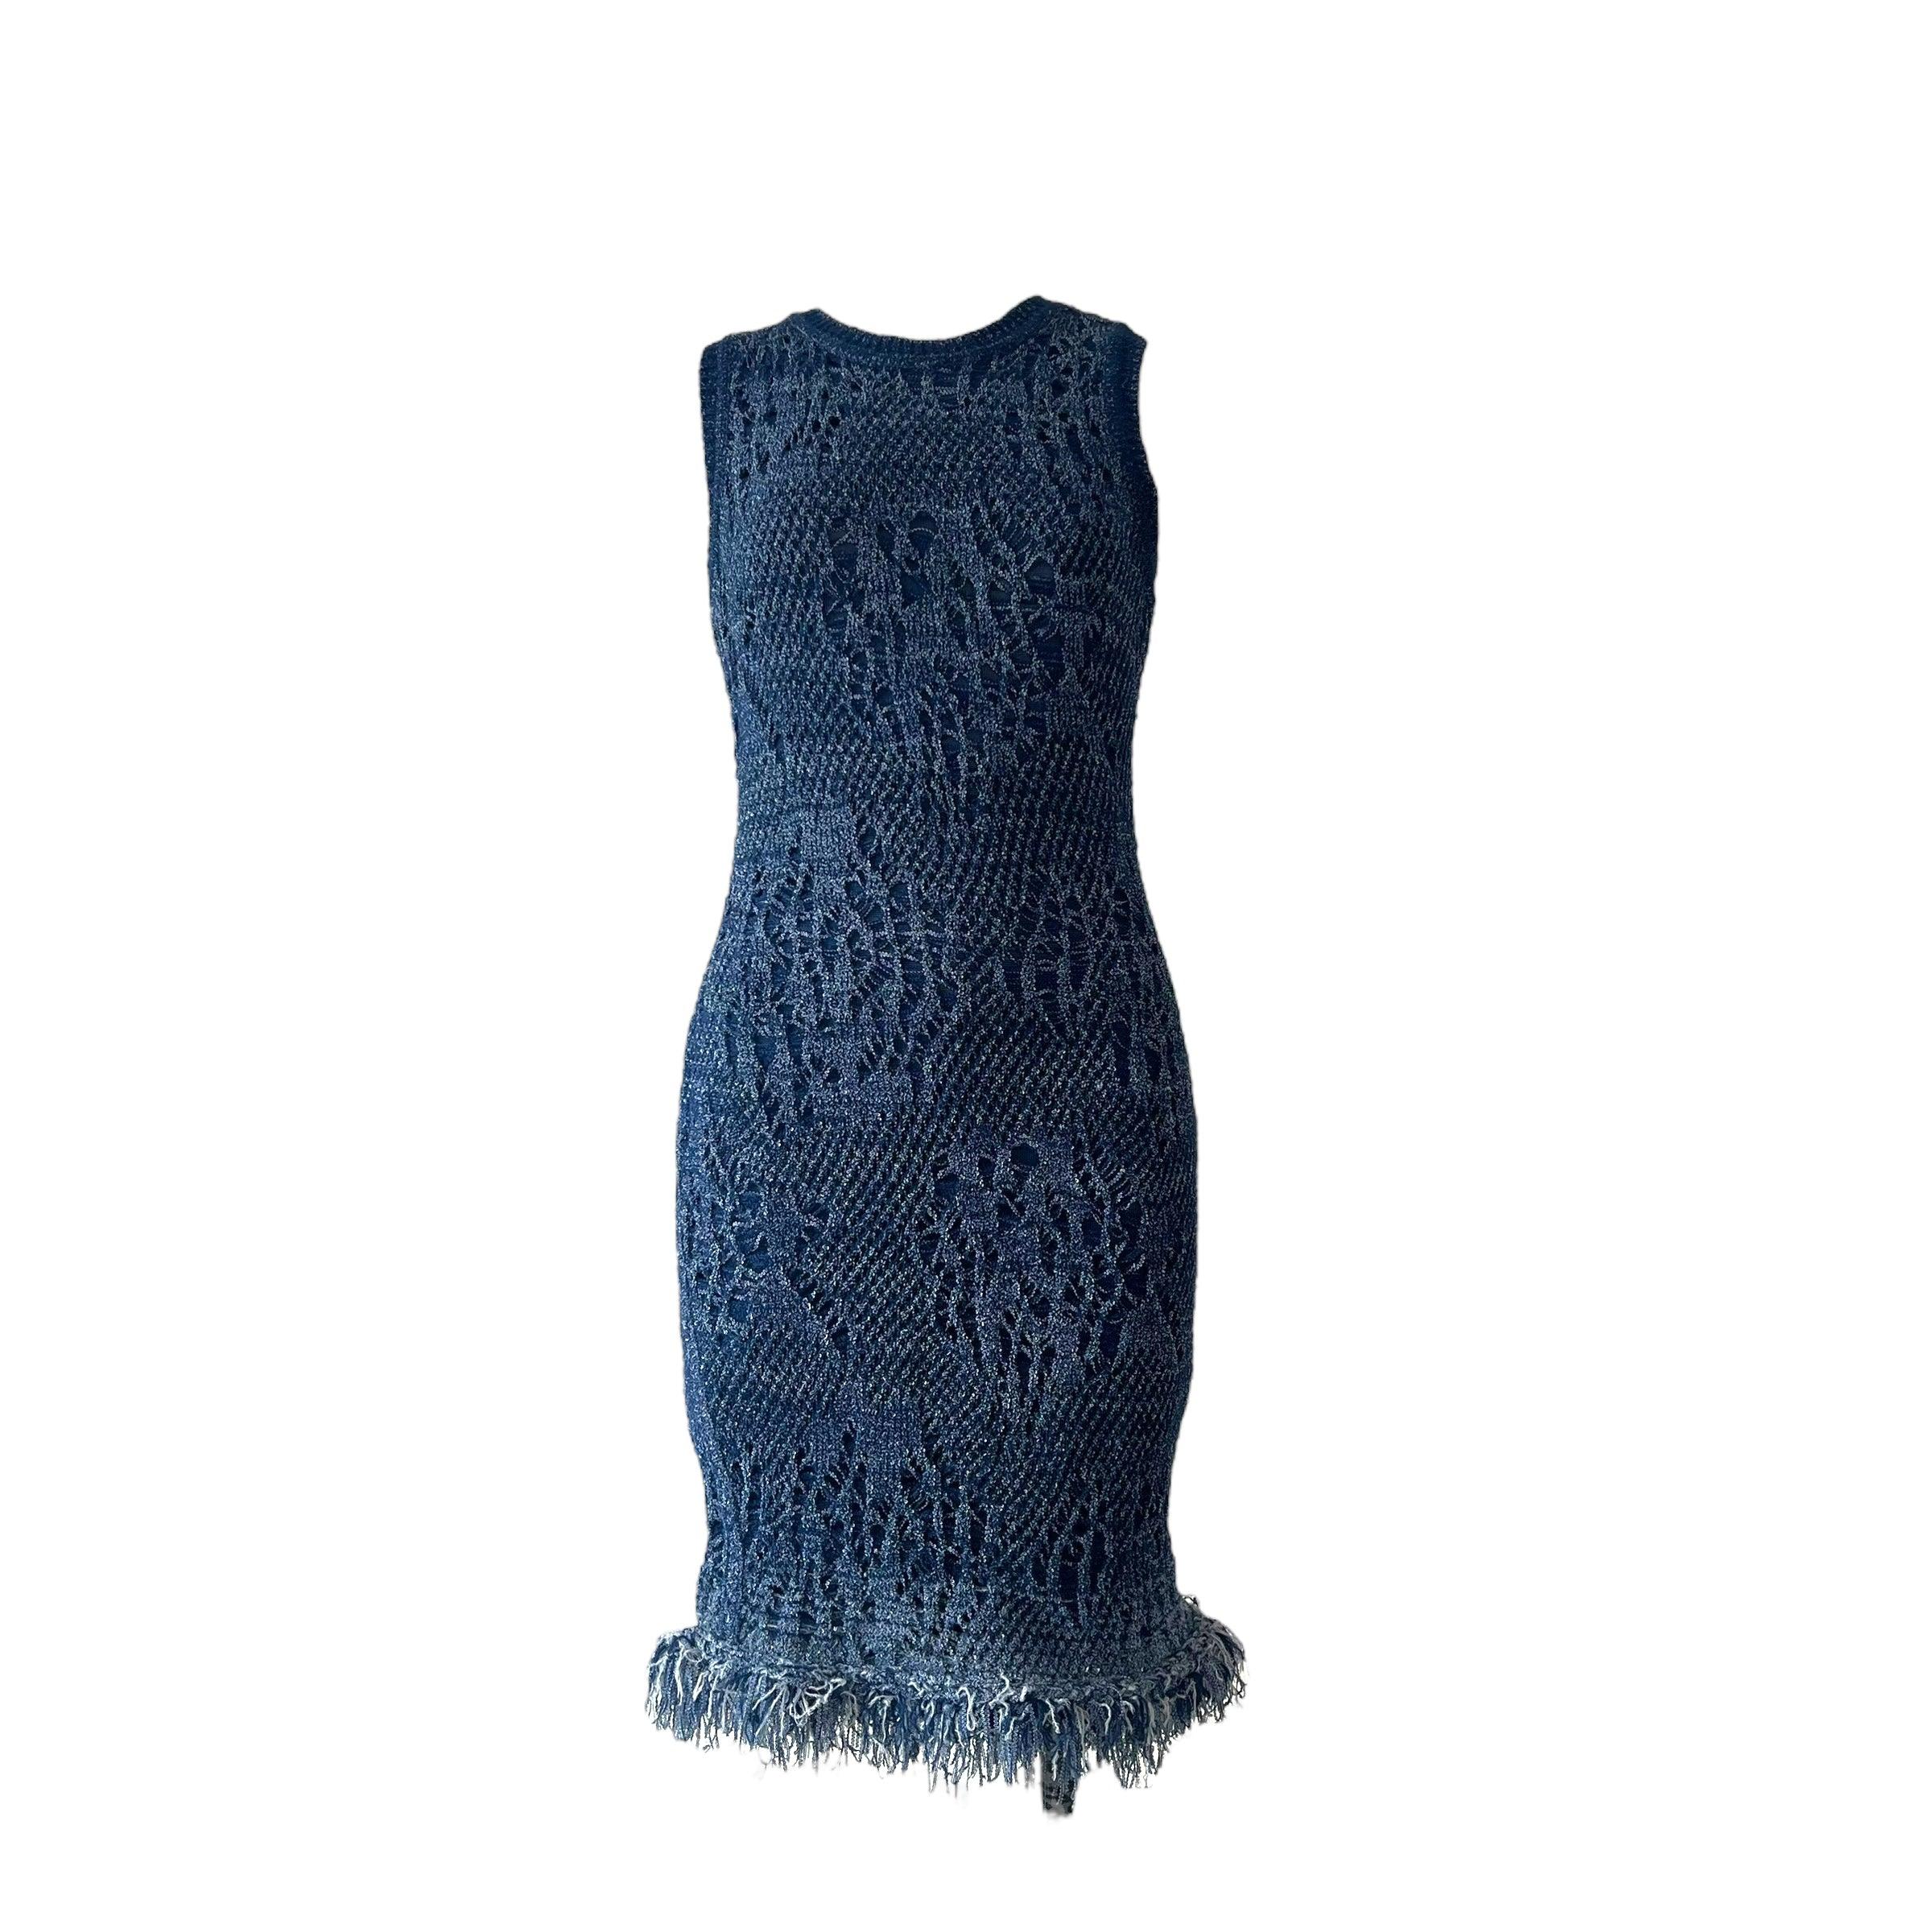 Introducing the iconic Christian Dior blue open-knit bodycon dress from the Spring-Summer 2000 collection, meticulously crafted by the visionary designer, John Galliano. This knee-length dress features a crew neck and incorporates various knitted